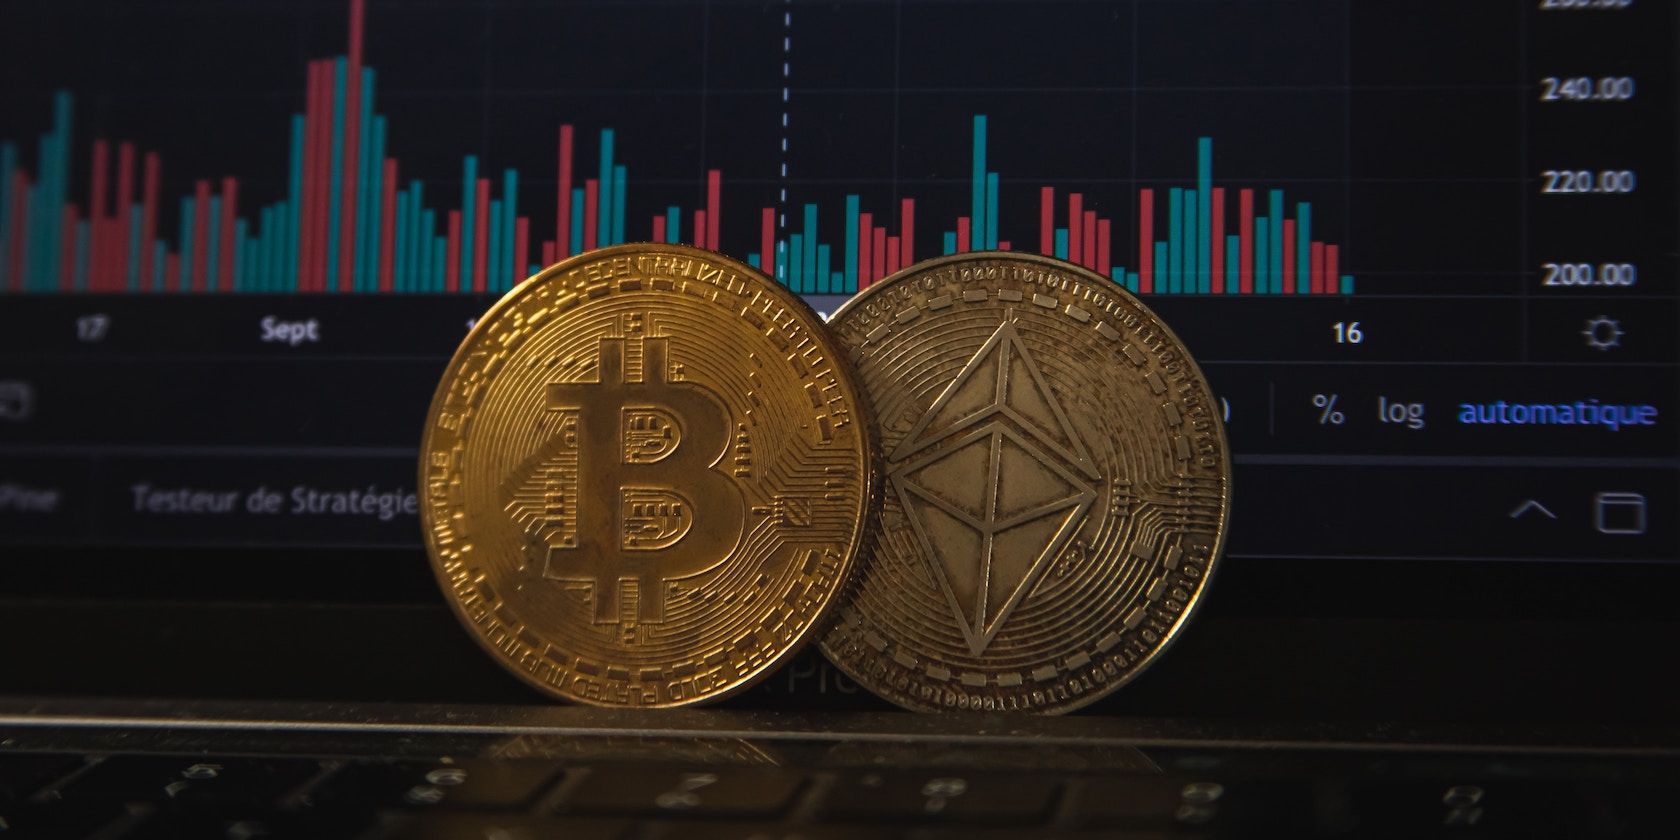 Bitcoin and ethereum coins in front of a trading graph